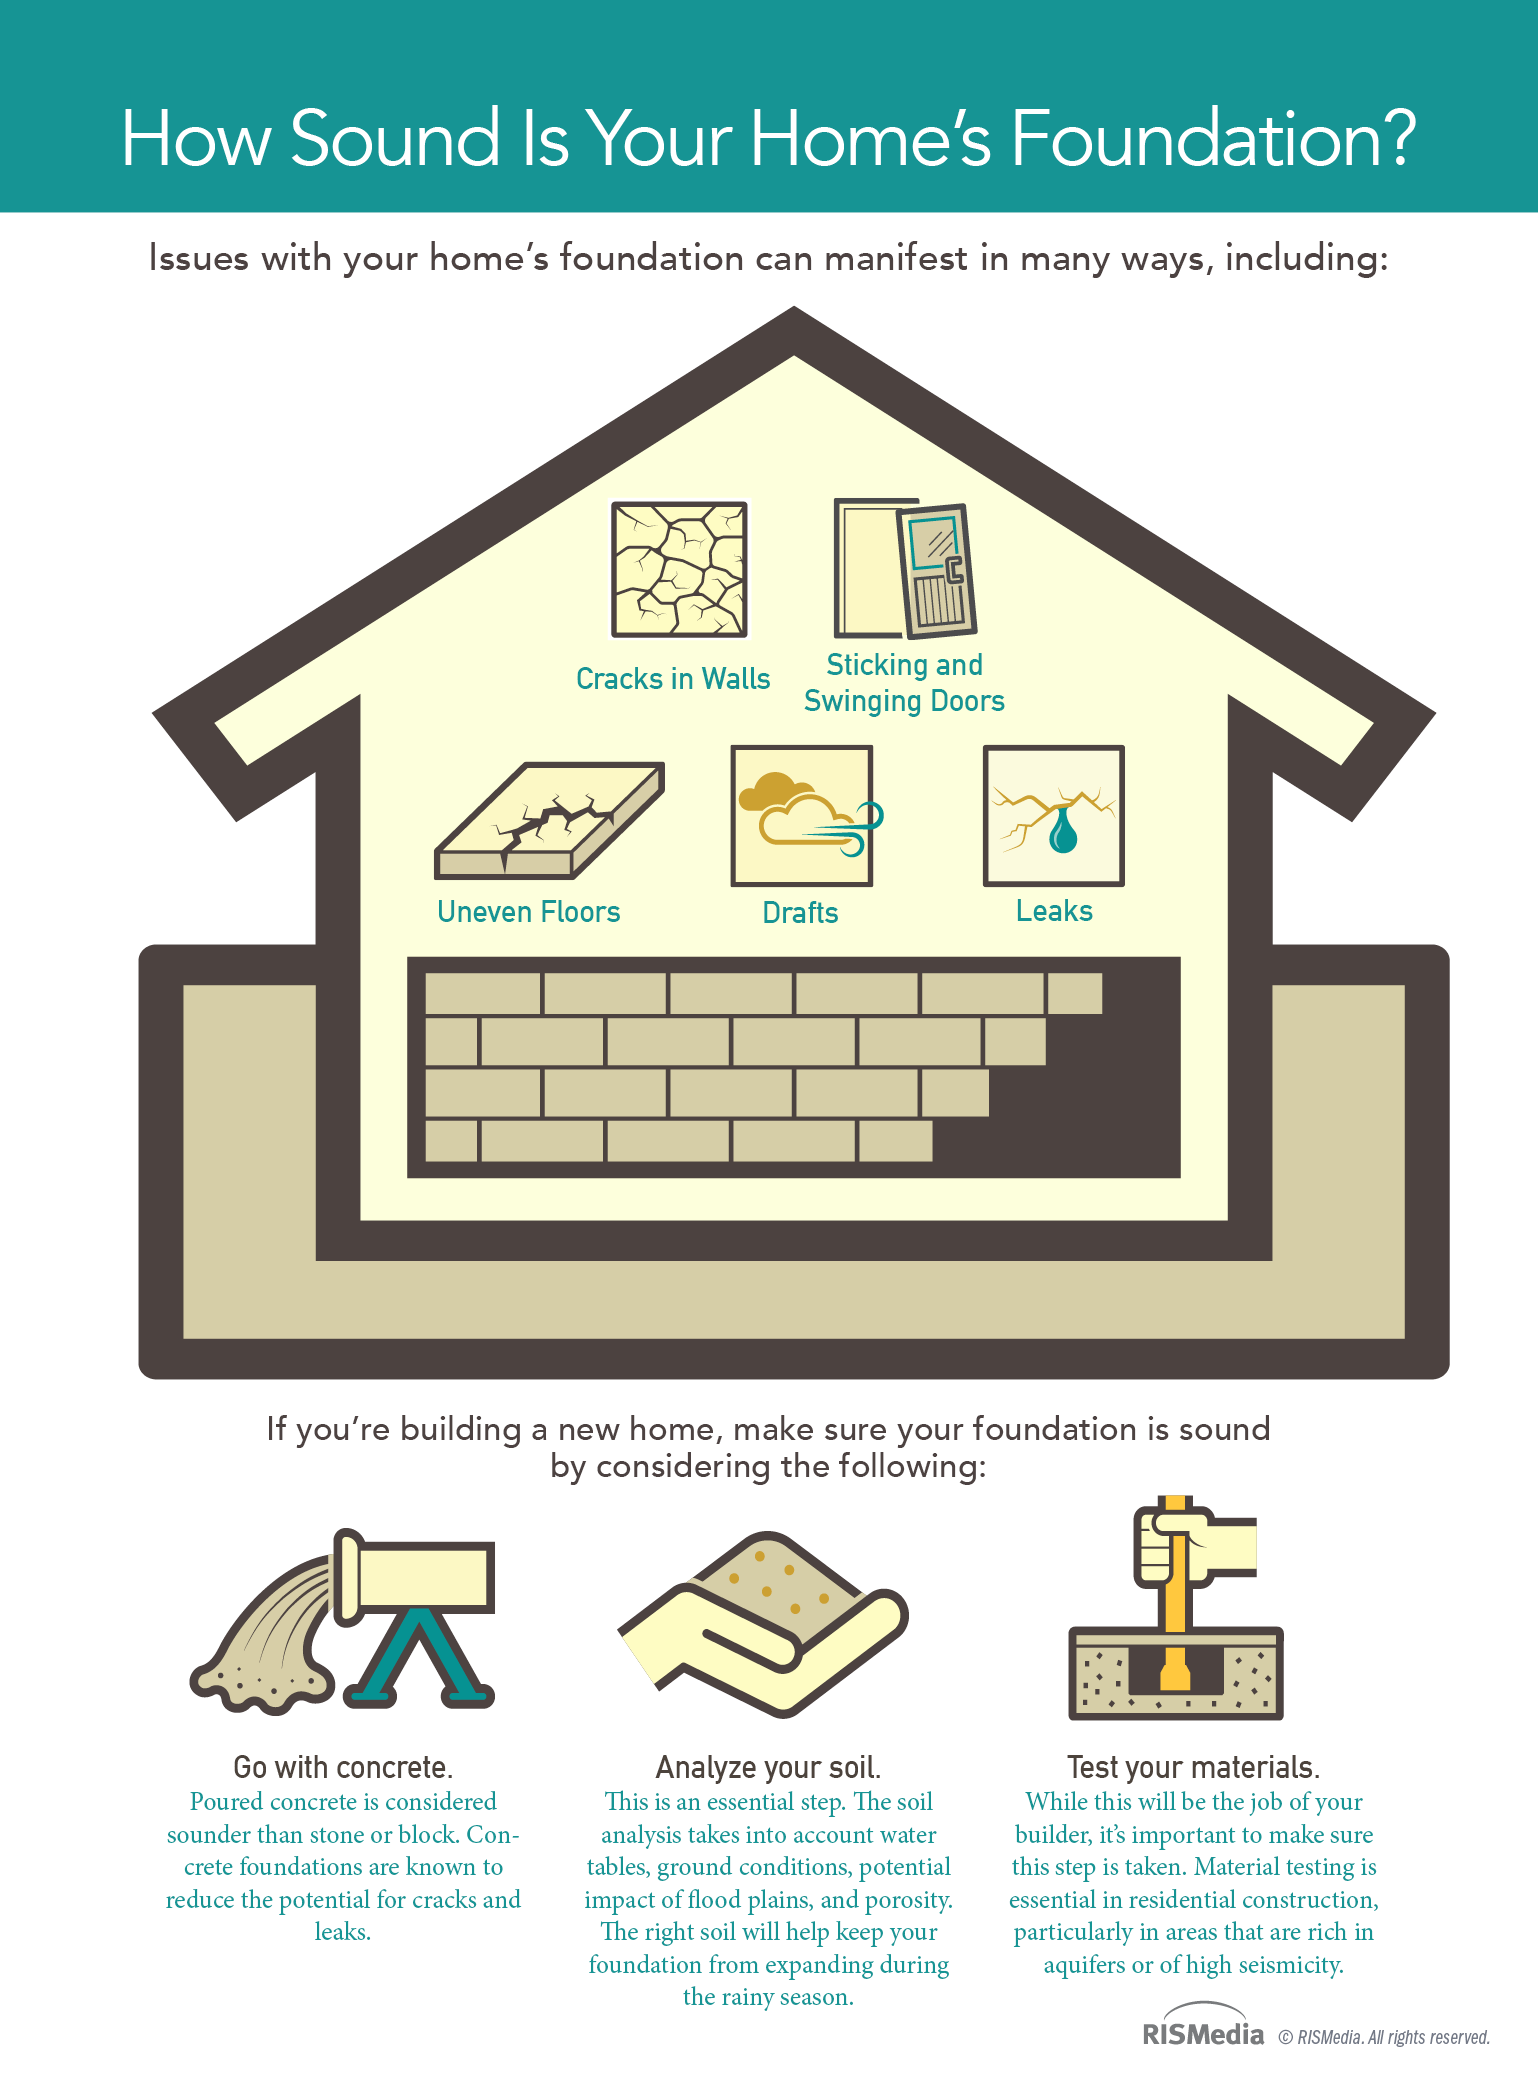 How Sound Is Your Home’s Foundation?